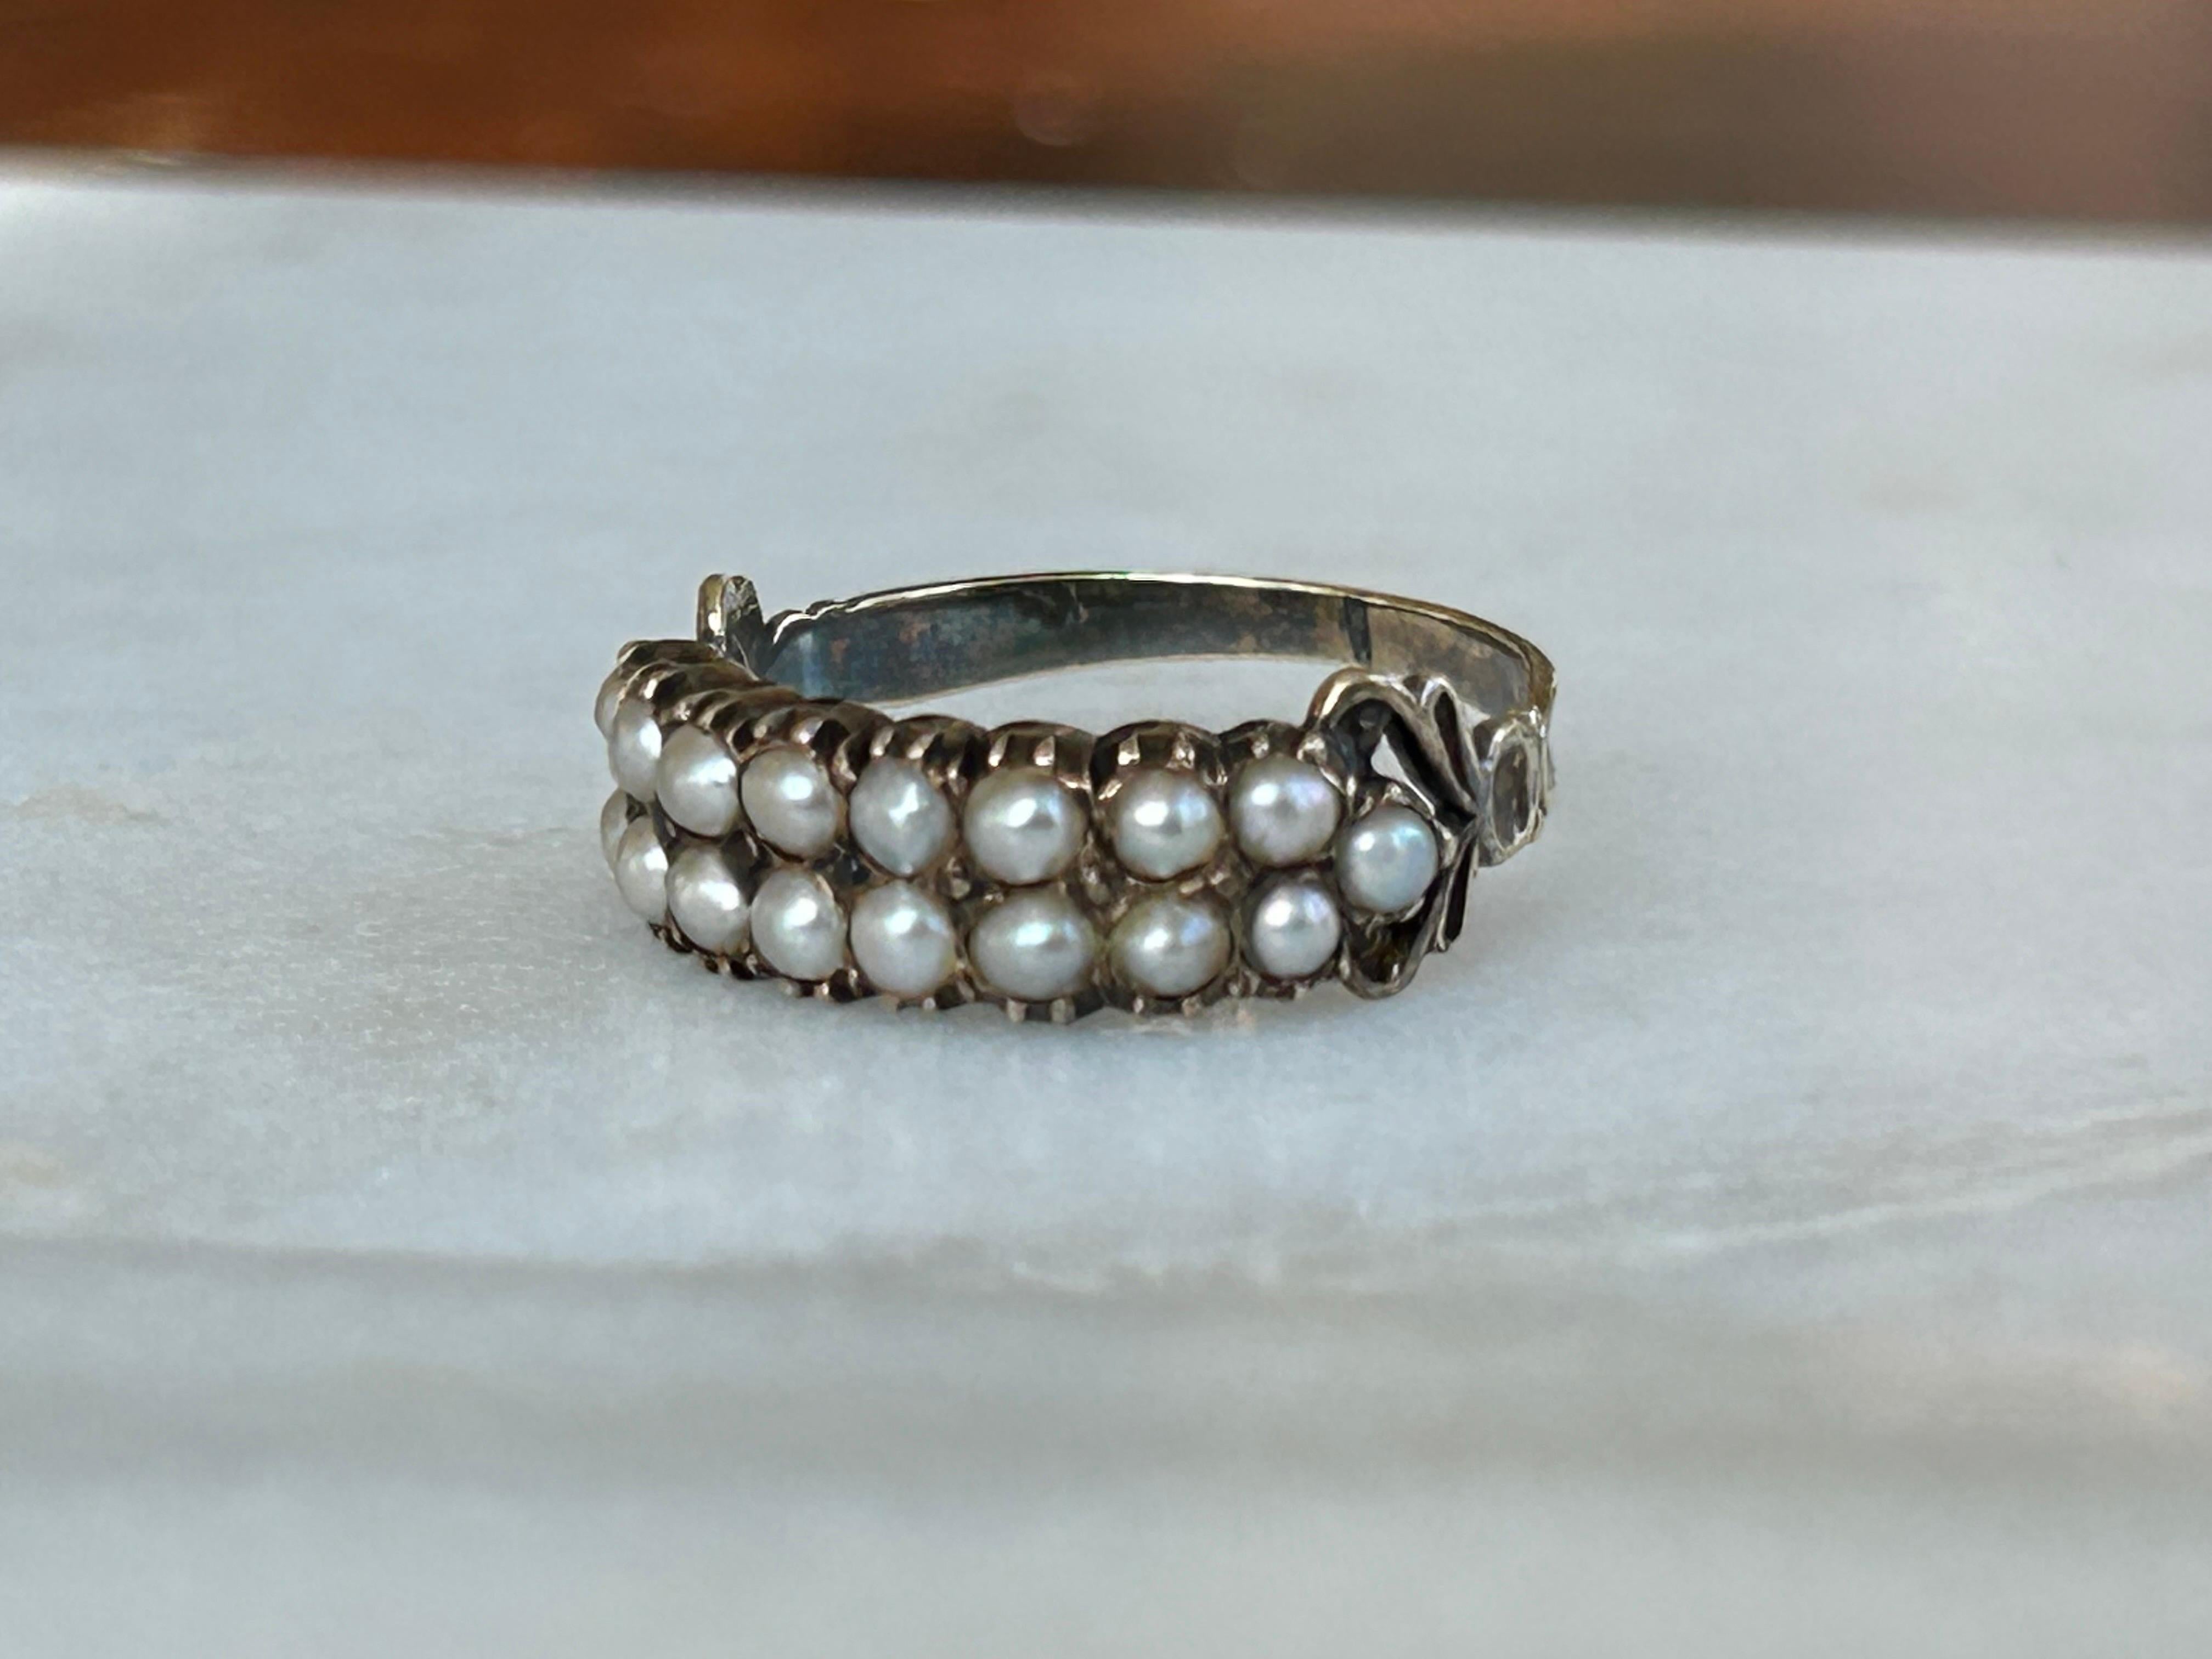 A magnificent Late Georgian/Early Victorian Double-Row Pearl Ring. Exquisitely crafted in 14k gold, this ring is a stunning showcase of the era's love for intricate designs and luxurious materials. The ring features two rows of delicately split